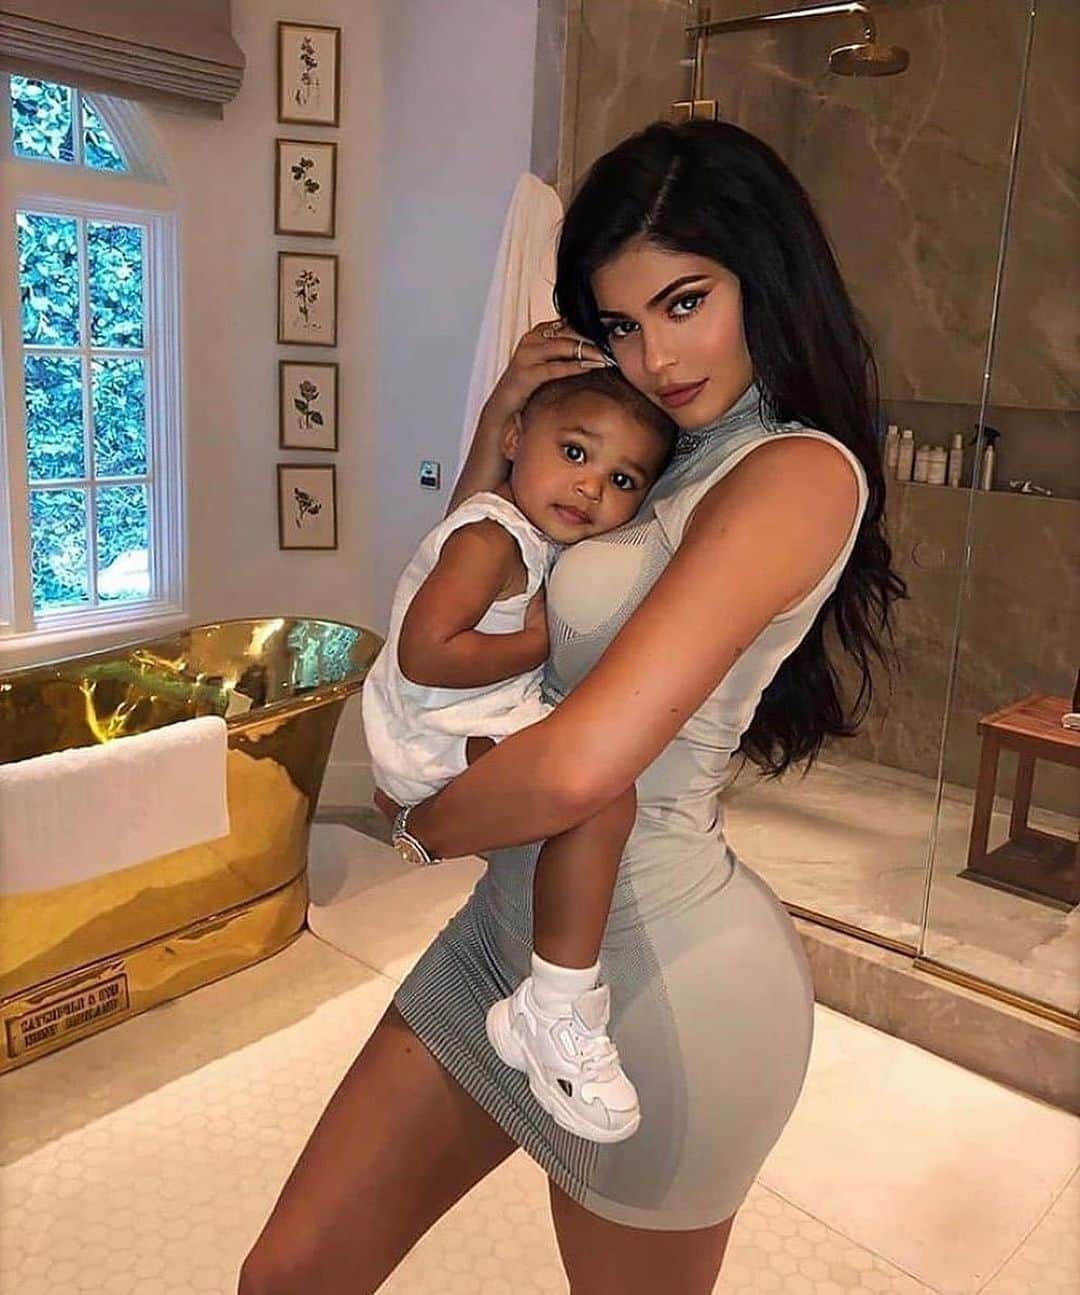 BeStylishのインスタグラム：「Kylie Jenner & her baby are so adorable 😍❤️🥺 absolute goals! 🥰 _ . Credit: @kyliejenner  _ #bestylish #cute #kyliejenner #cutebaby #stormijenner #kyliecosmetics #babyfever #motherbaby #family #goals」